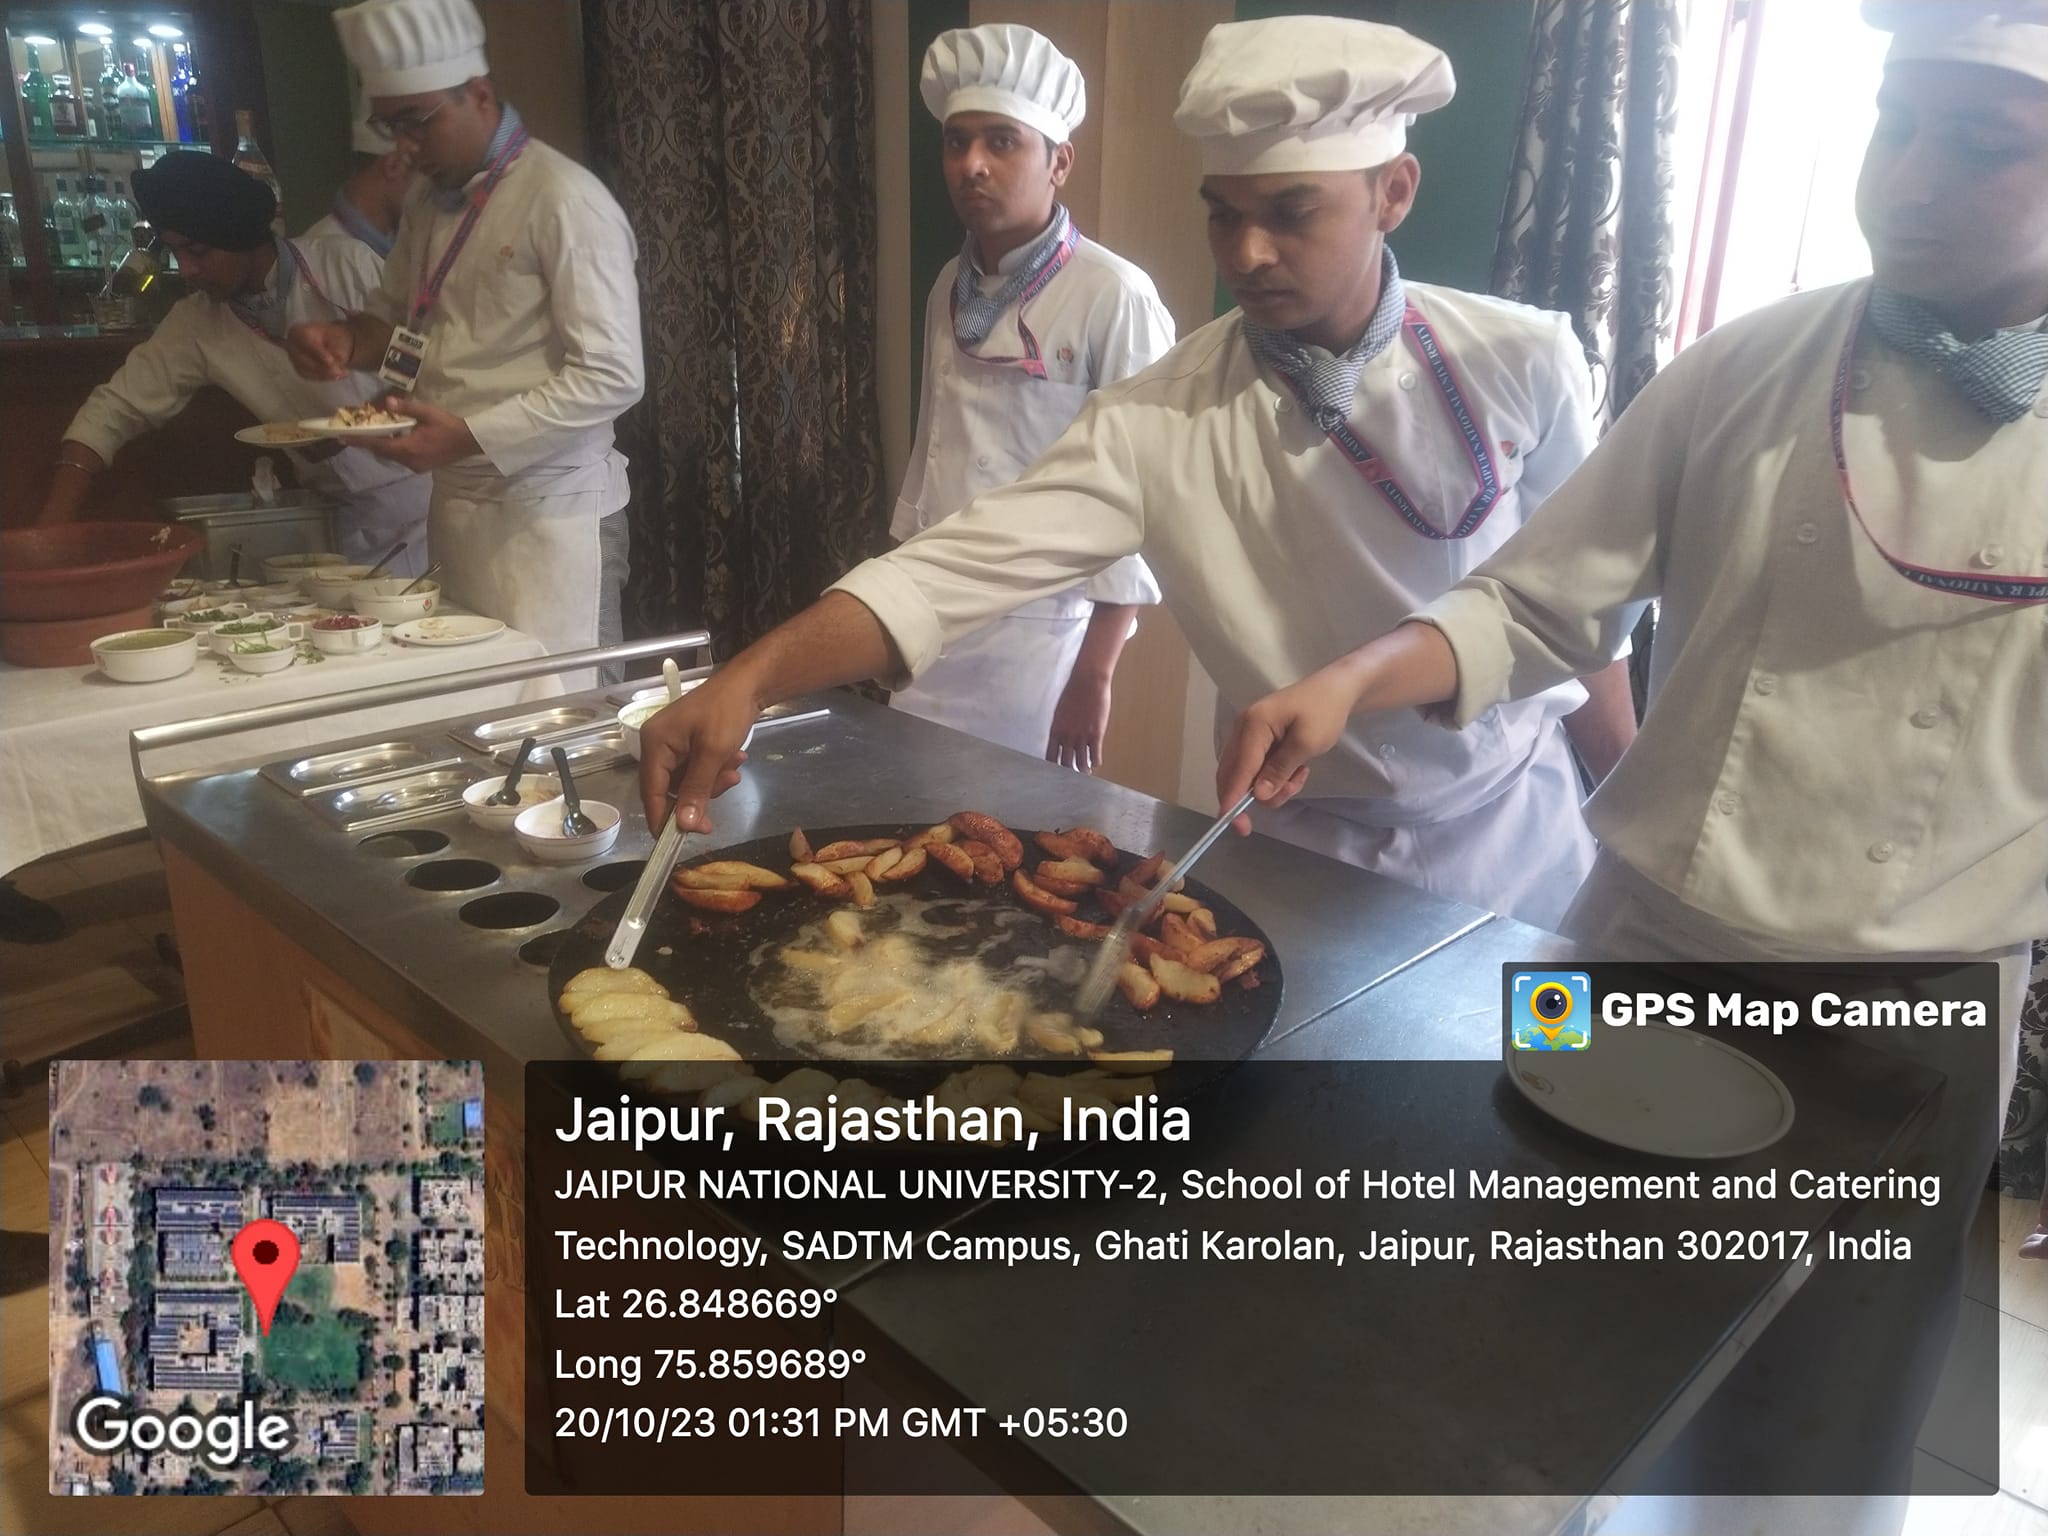 School of Hotel Management & Catering Technology